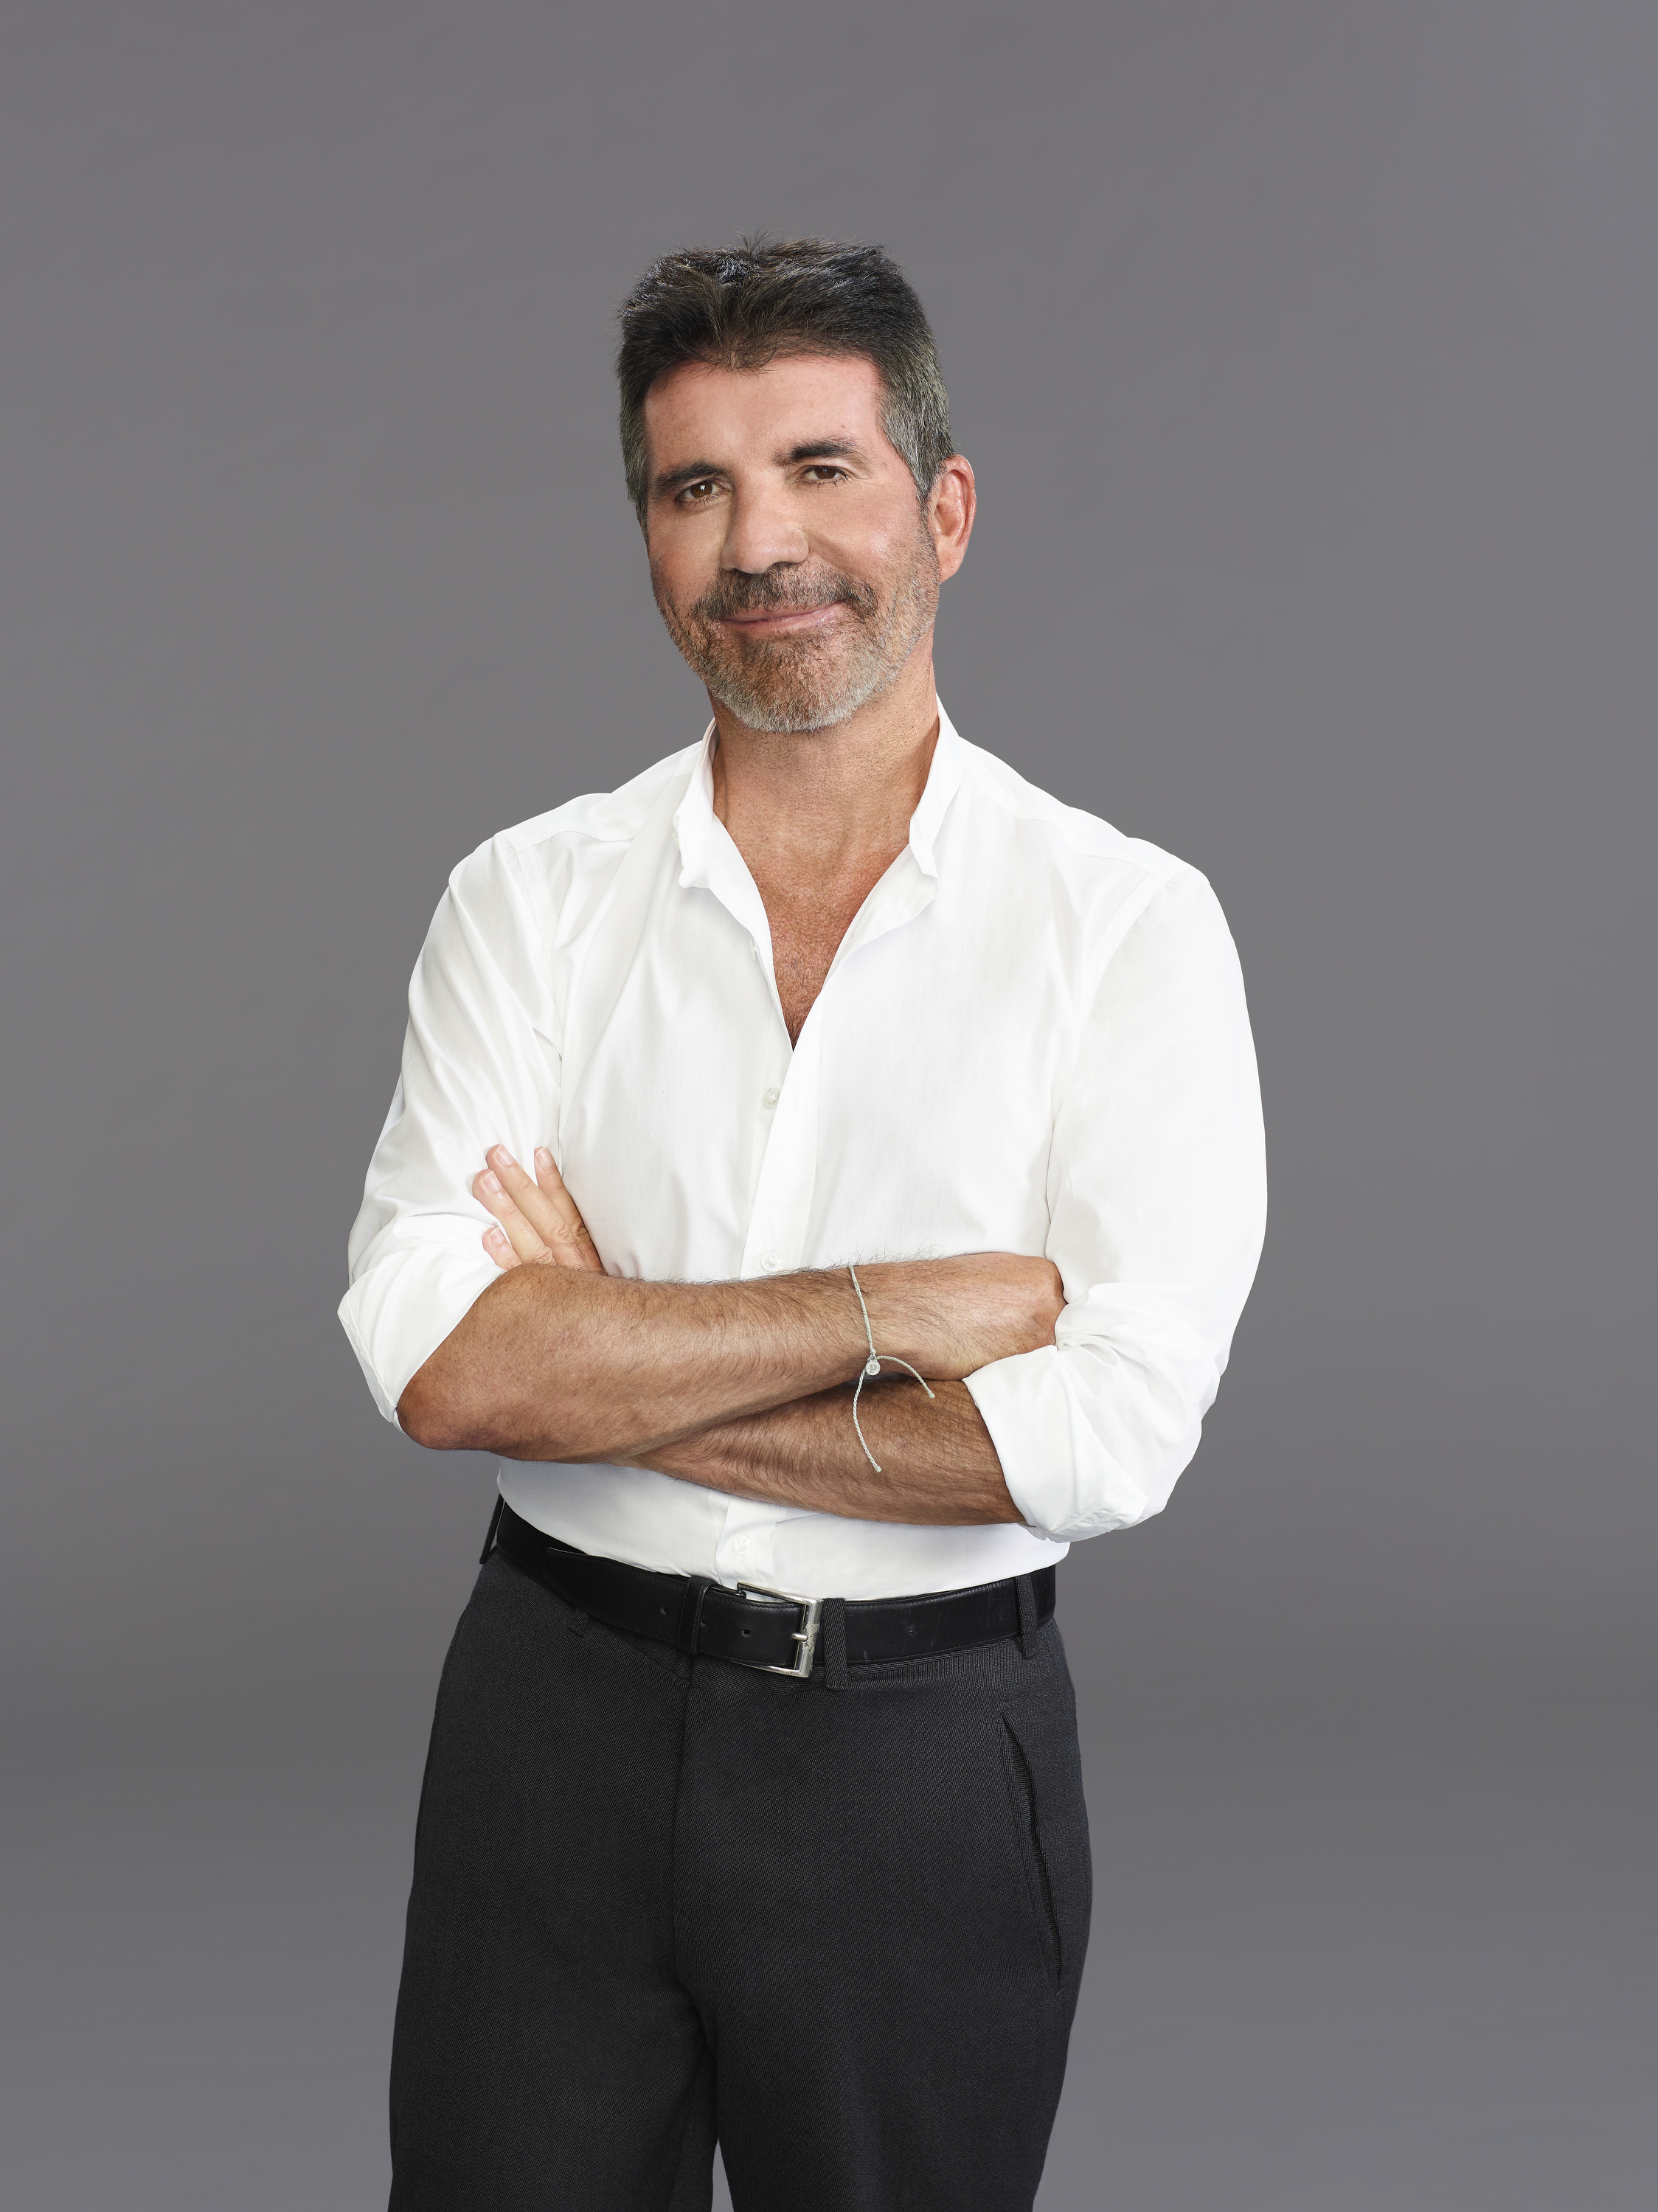 Simon Cowell in Los Angeles in 2006 | Source: Getty Images